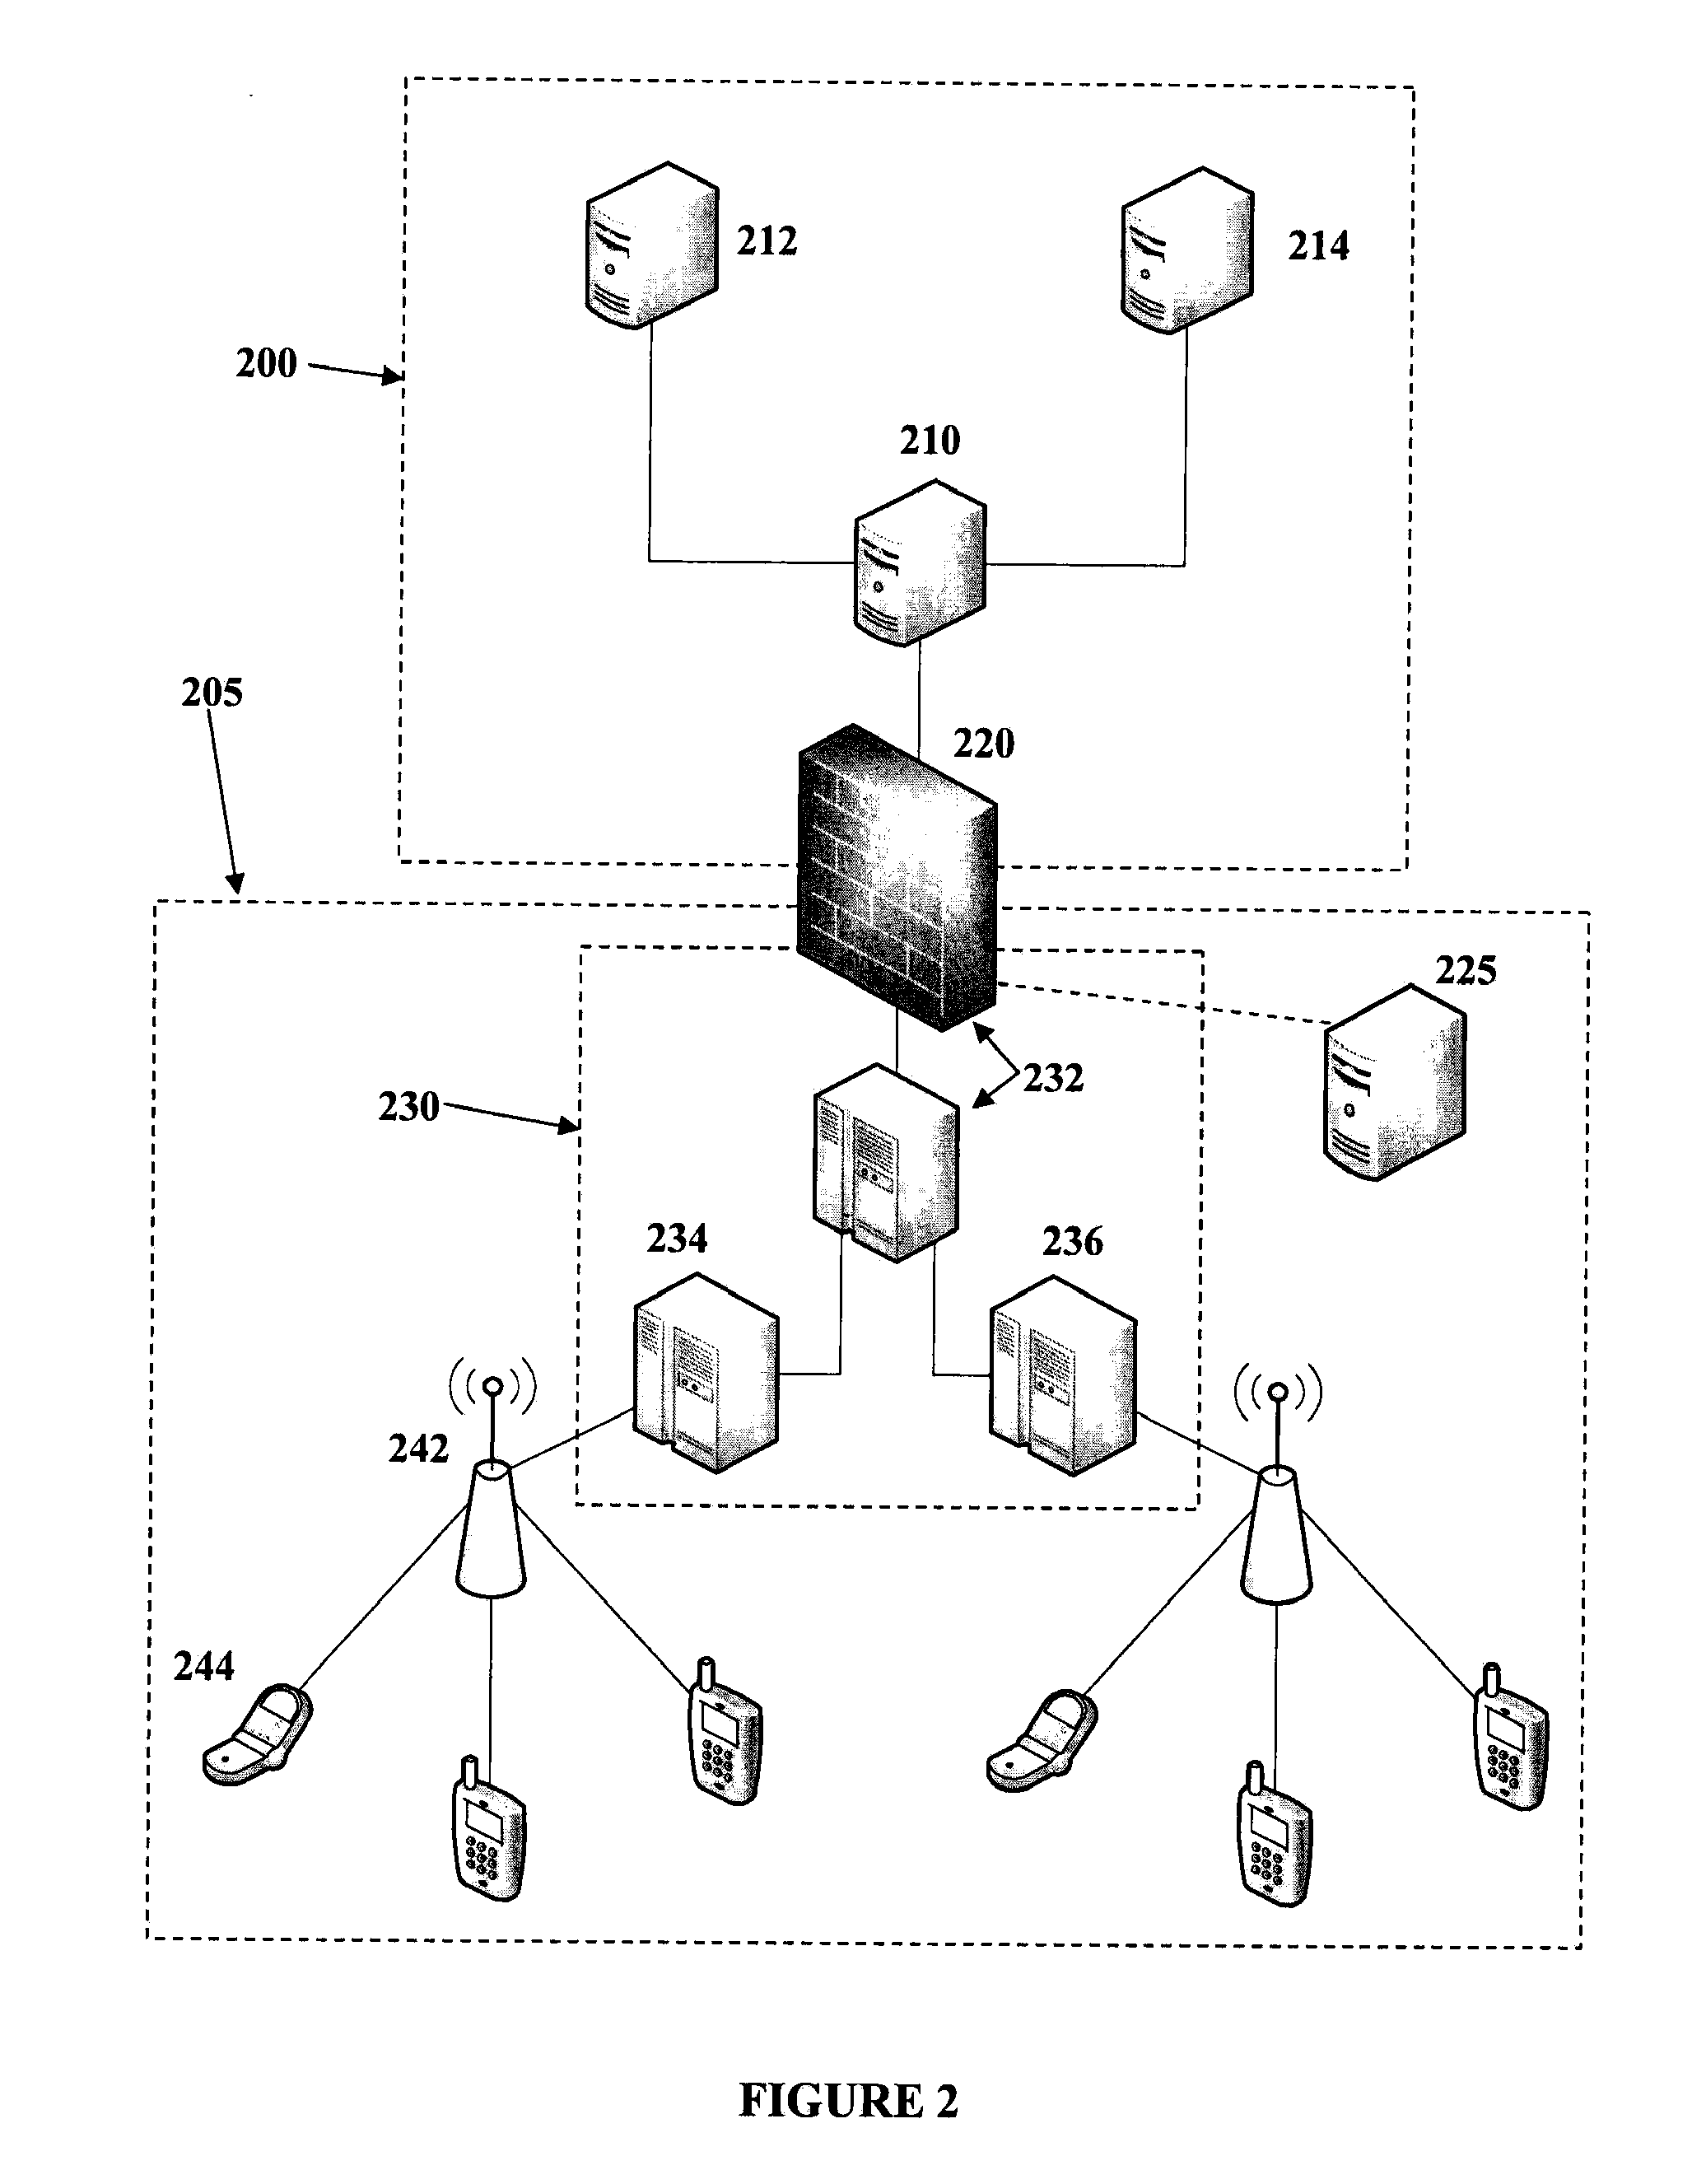 Method and apparatus for facilitating push communication across a network boundary